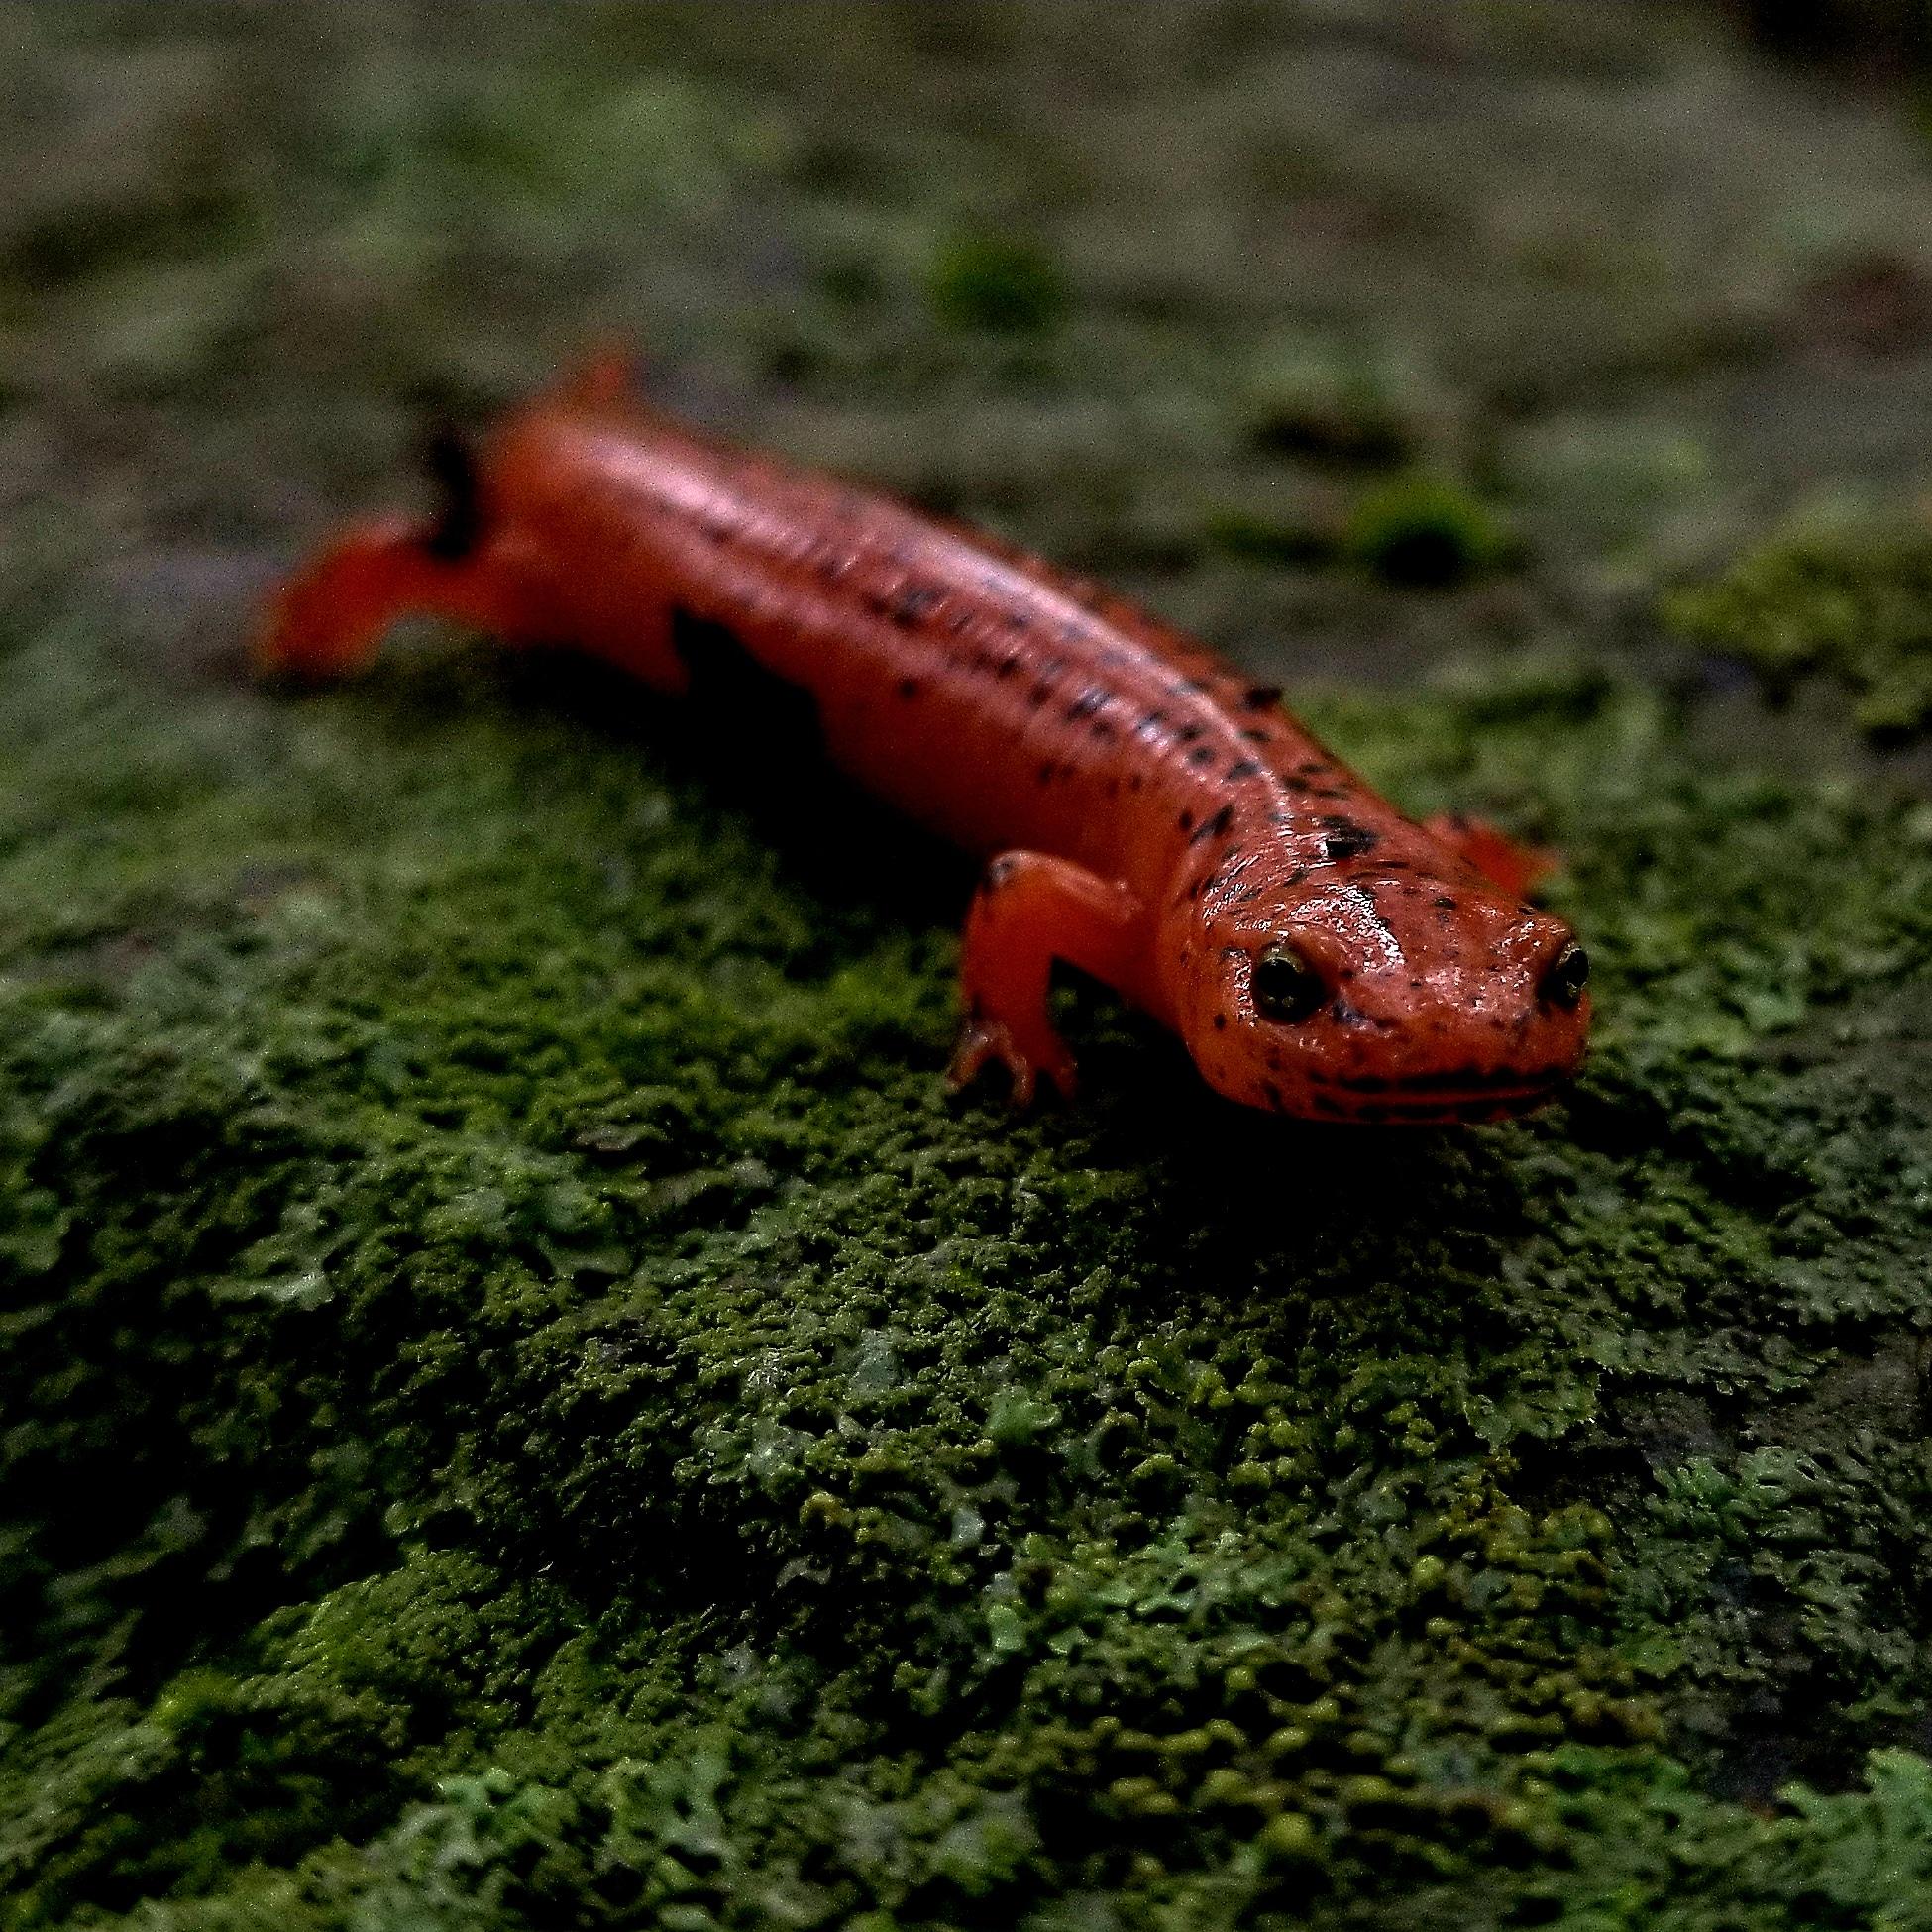 A slender-bodied, red salamander with black spots across its body.